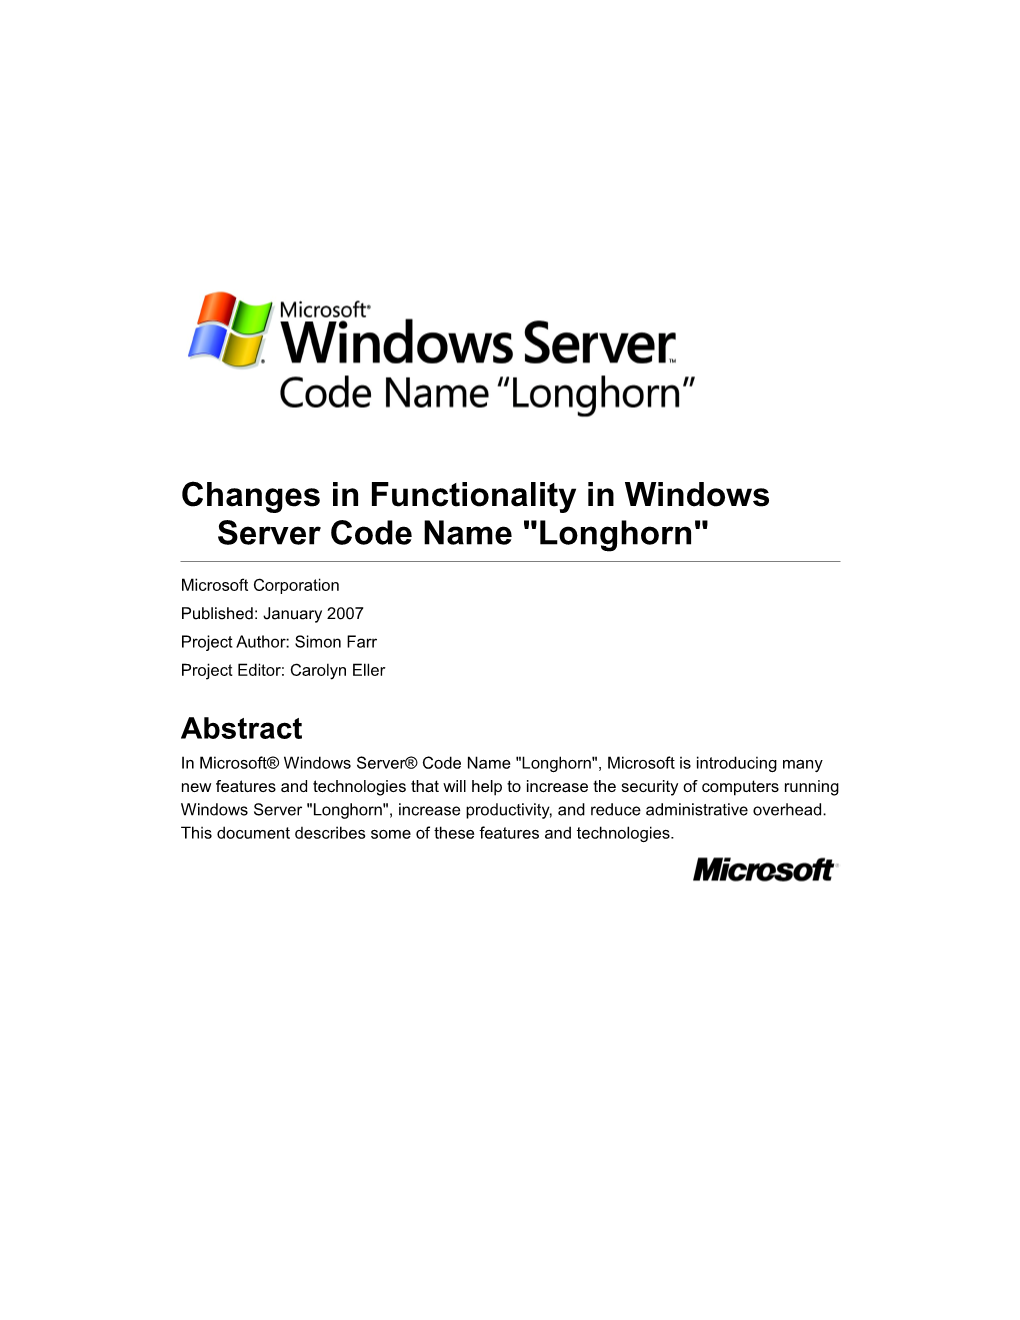 Changes in Functionality in Windows Server Code Name Longhorn